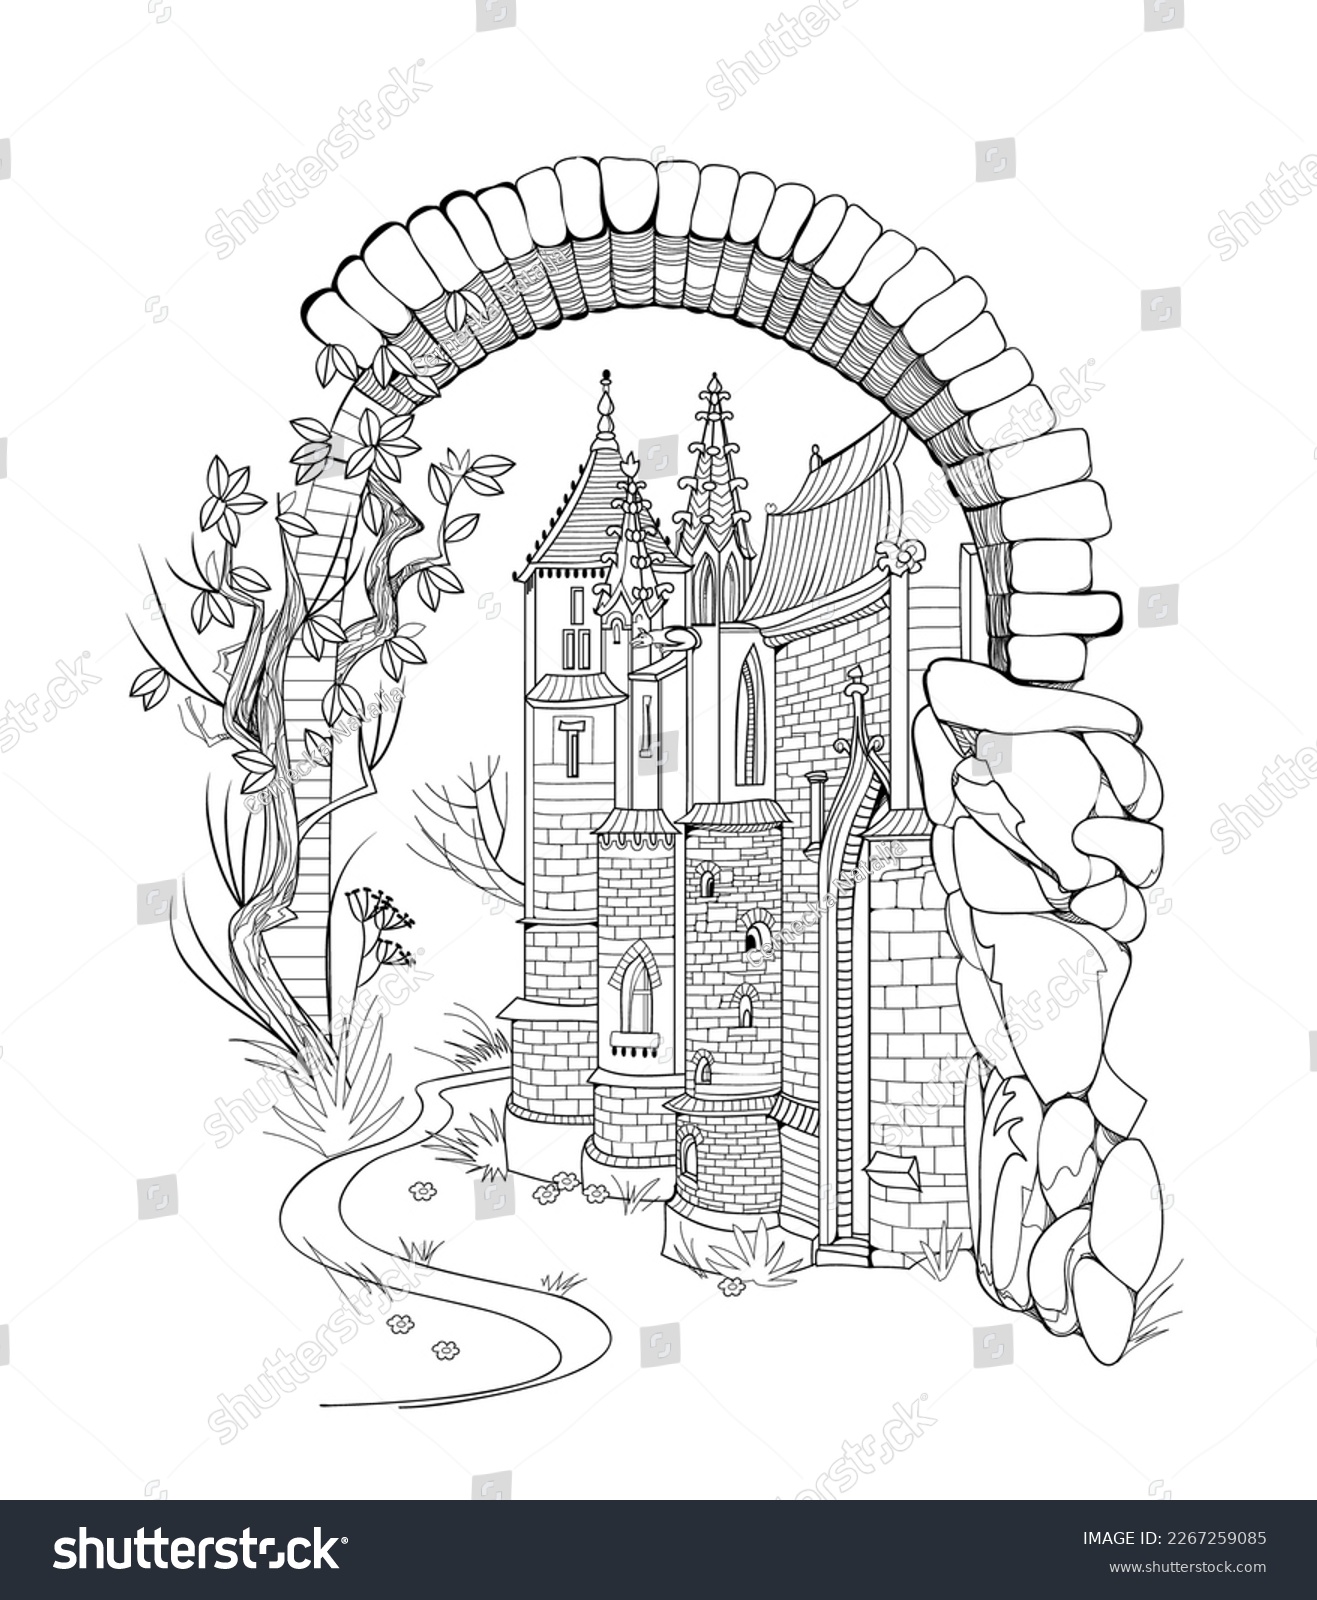 SVG of Illustration of ancient medieval castle. Fairyland kingdom. Black and white page for kids coloring book. Worksheet for drawing and meditation for children and adults. French architecture. Vector image svg